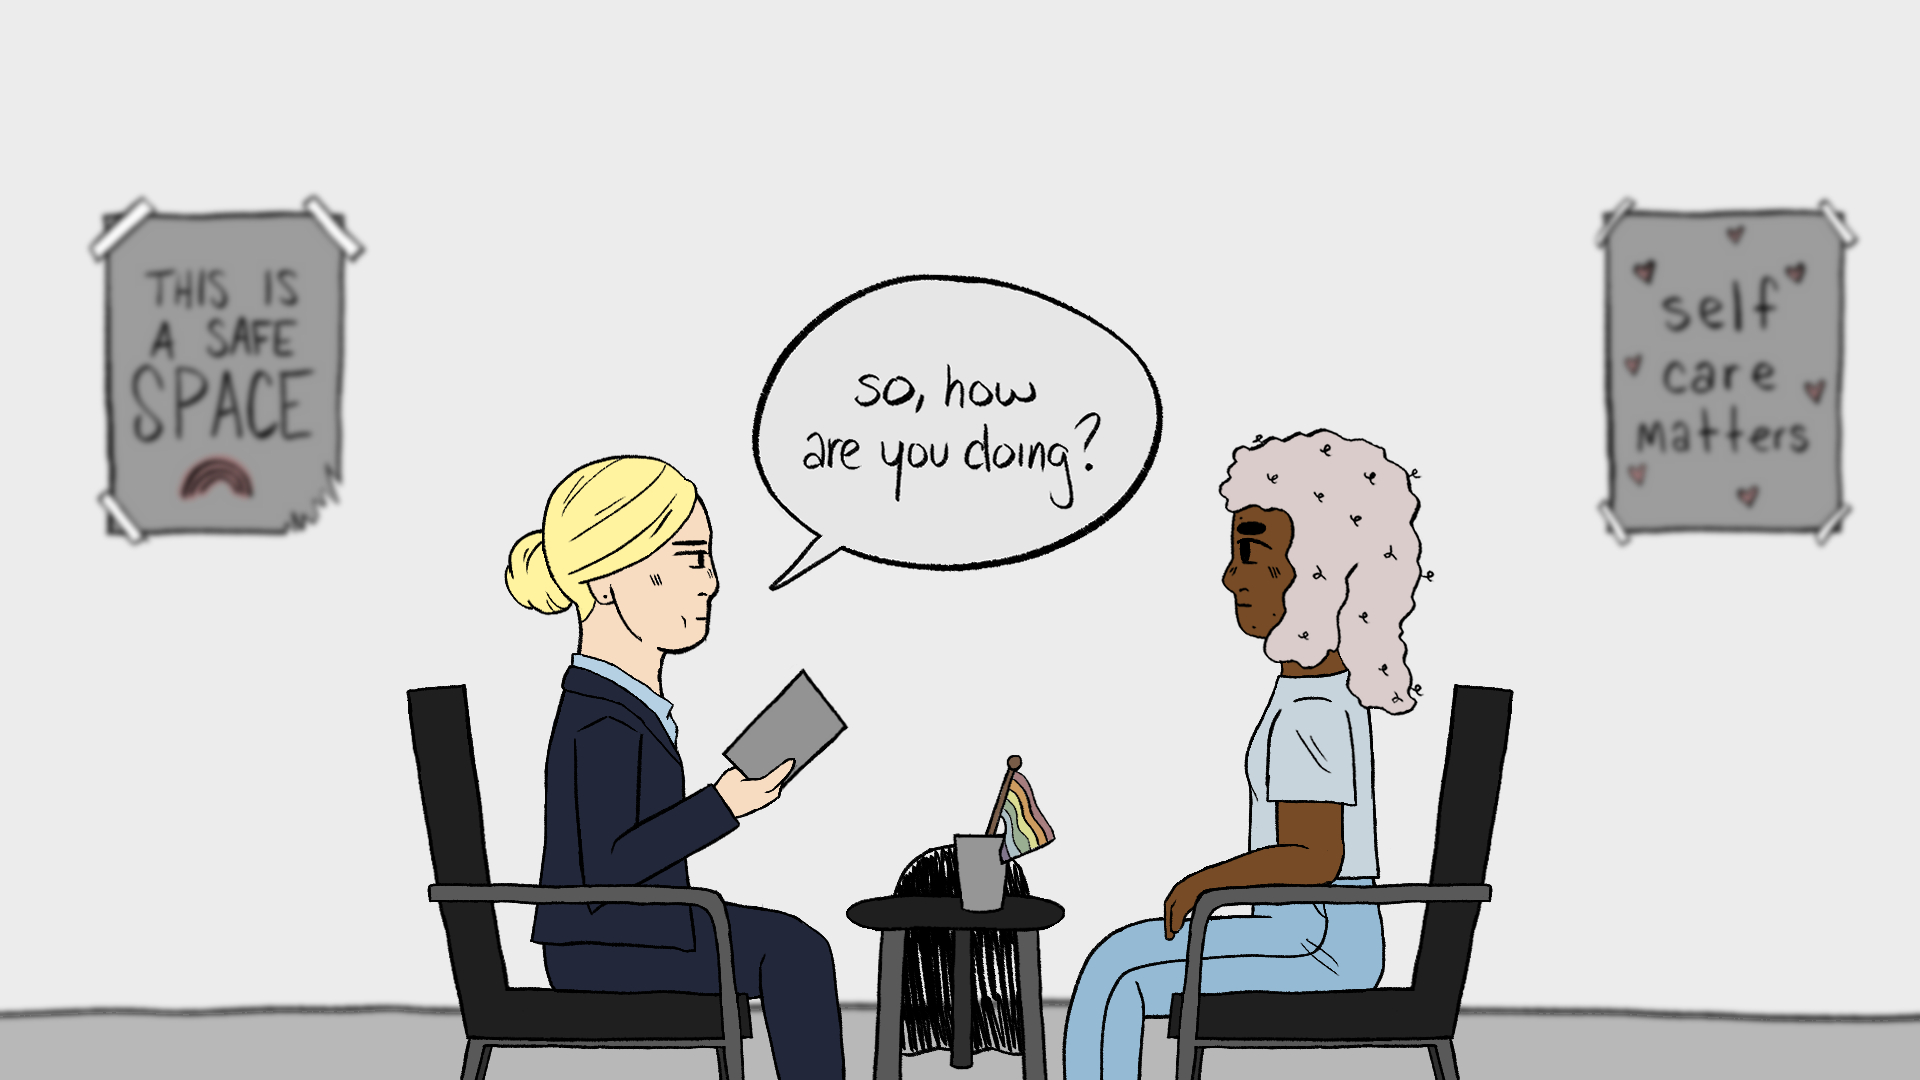 A still from an animated short film of the main character sat in a grey room opposite a therapist. The main character is in their twenties has light pink curly shoulder length hair, dark brown skin, and is wearing a light blue t-shirt and light blue jeans. The therapist is a blonde middle-aged woman with her hair in a tight bun. She is wearing a dark blue business suit and a light blue dress shirt underneath. She is holding a grey notebook in her right hand. Both the main character and therapist are sat in identical black and grey chairs, in between a grey three-legged table with a rainbow pride flag in a cup on the table. Behind the table is a small ghost-like figure. On the wall are two grey posters that say "This is a safe space" with a rainbow underneath and "self care matters" with various hearts around the words.